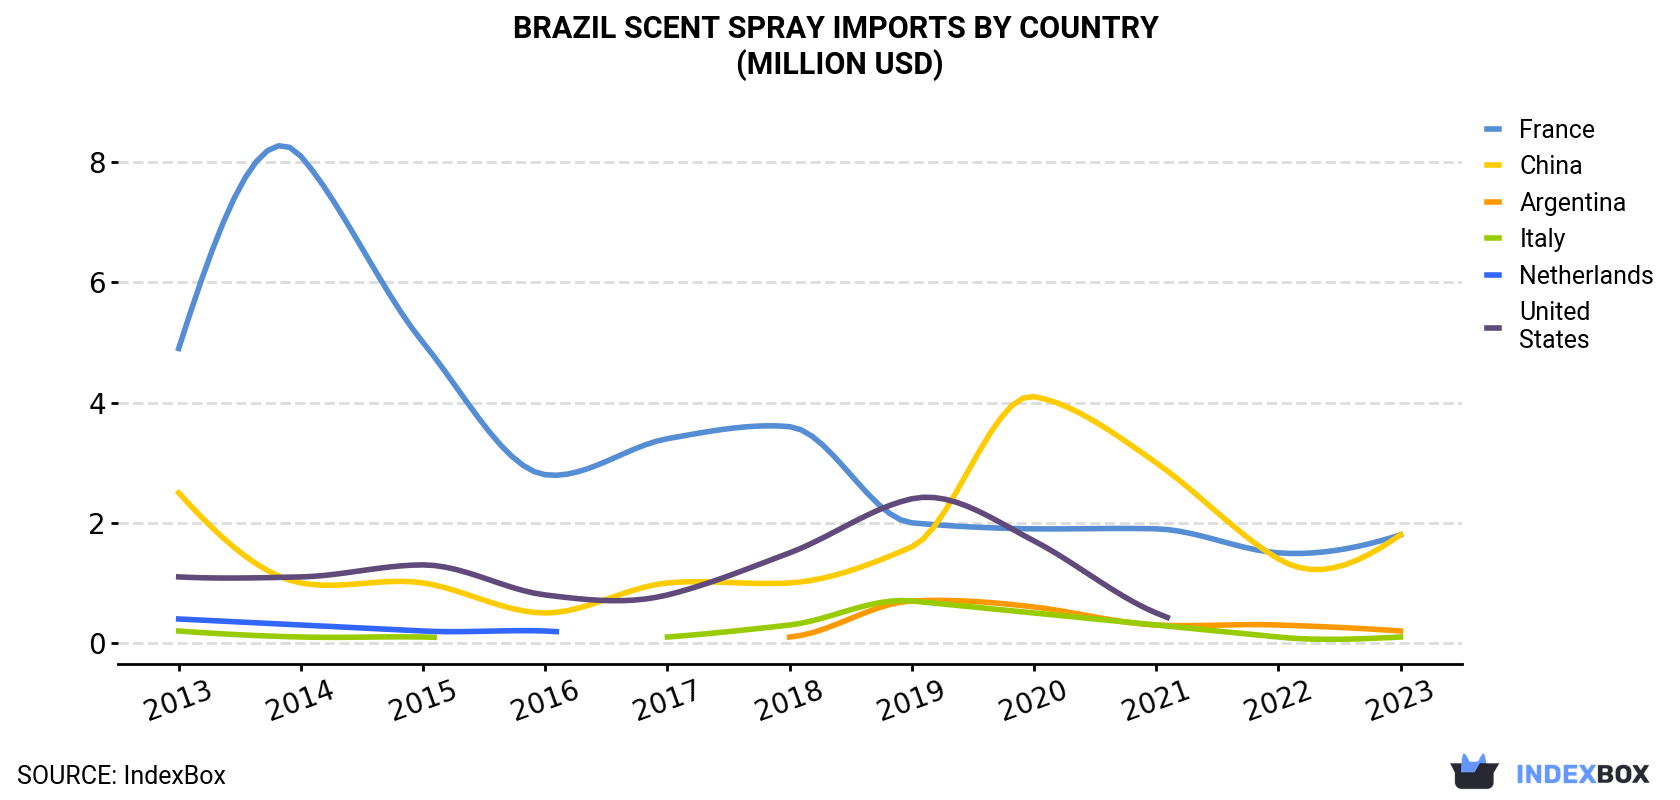 Brazil Scent Spray Imports By Country (Million USD)